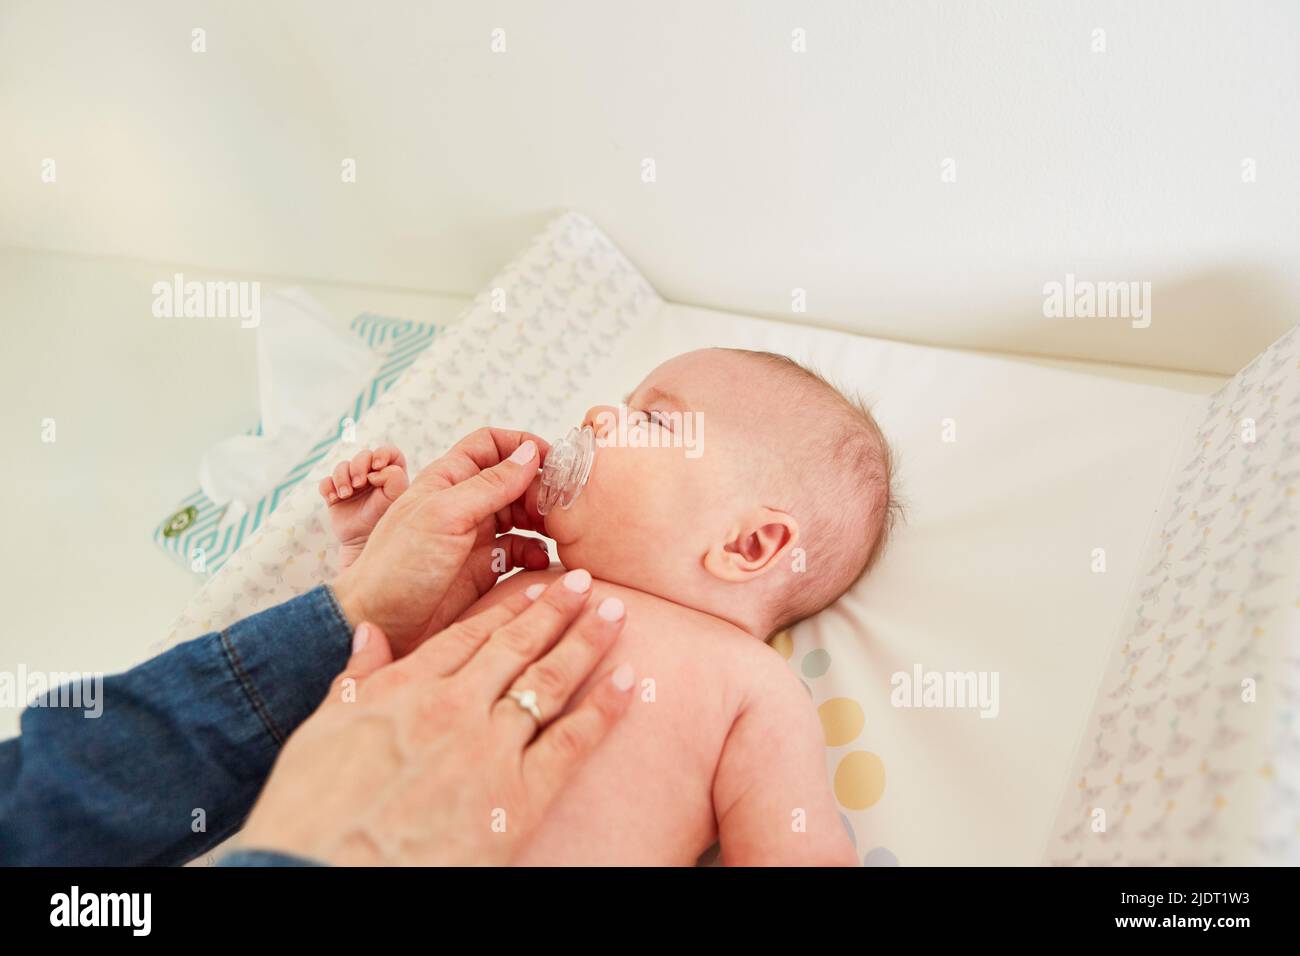 Caring mother gives her baby a pacifier for comfort on the changing table Stock Photo